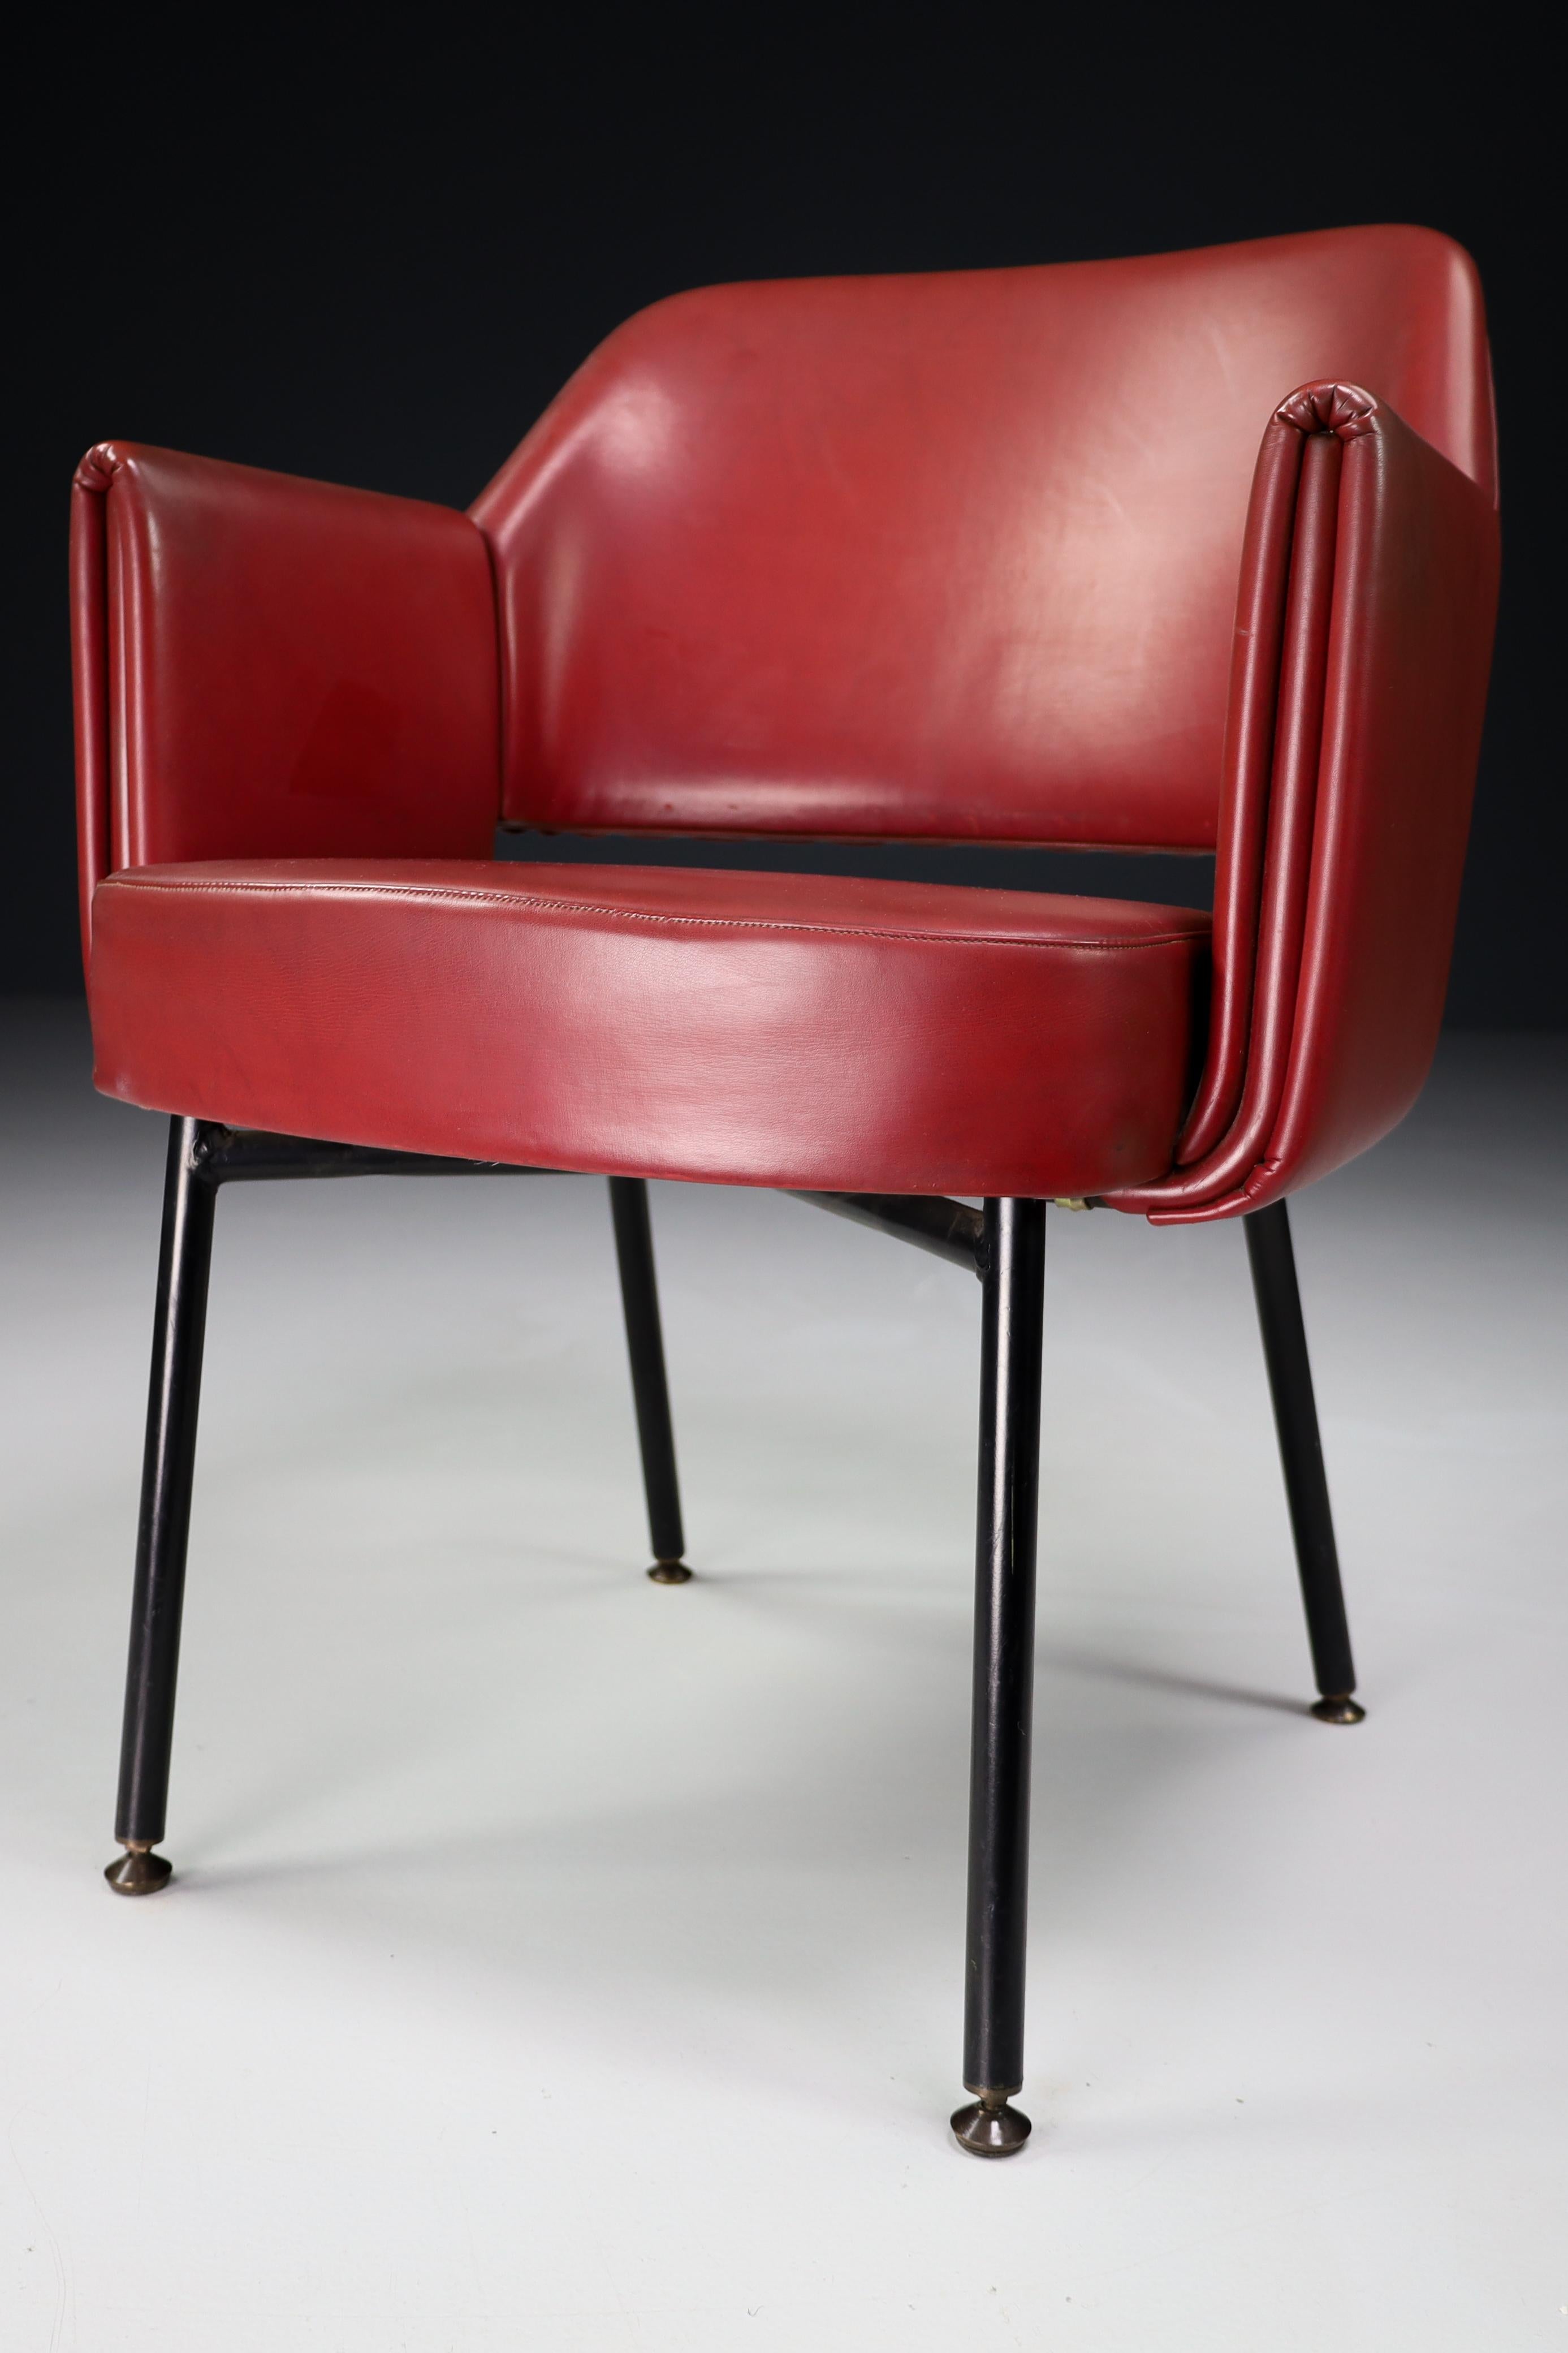 Midcentury Chair Model "Deauville", Designed by Marc and Pierre Simon, 1962